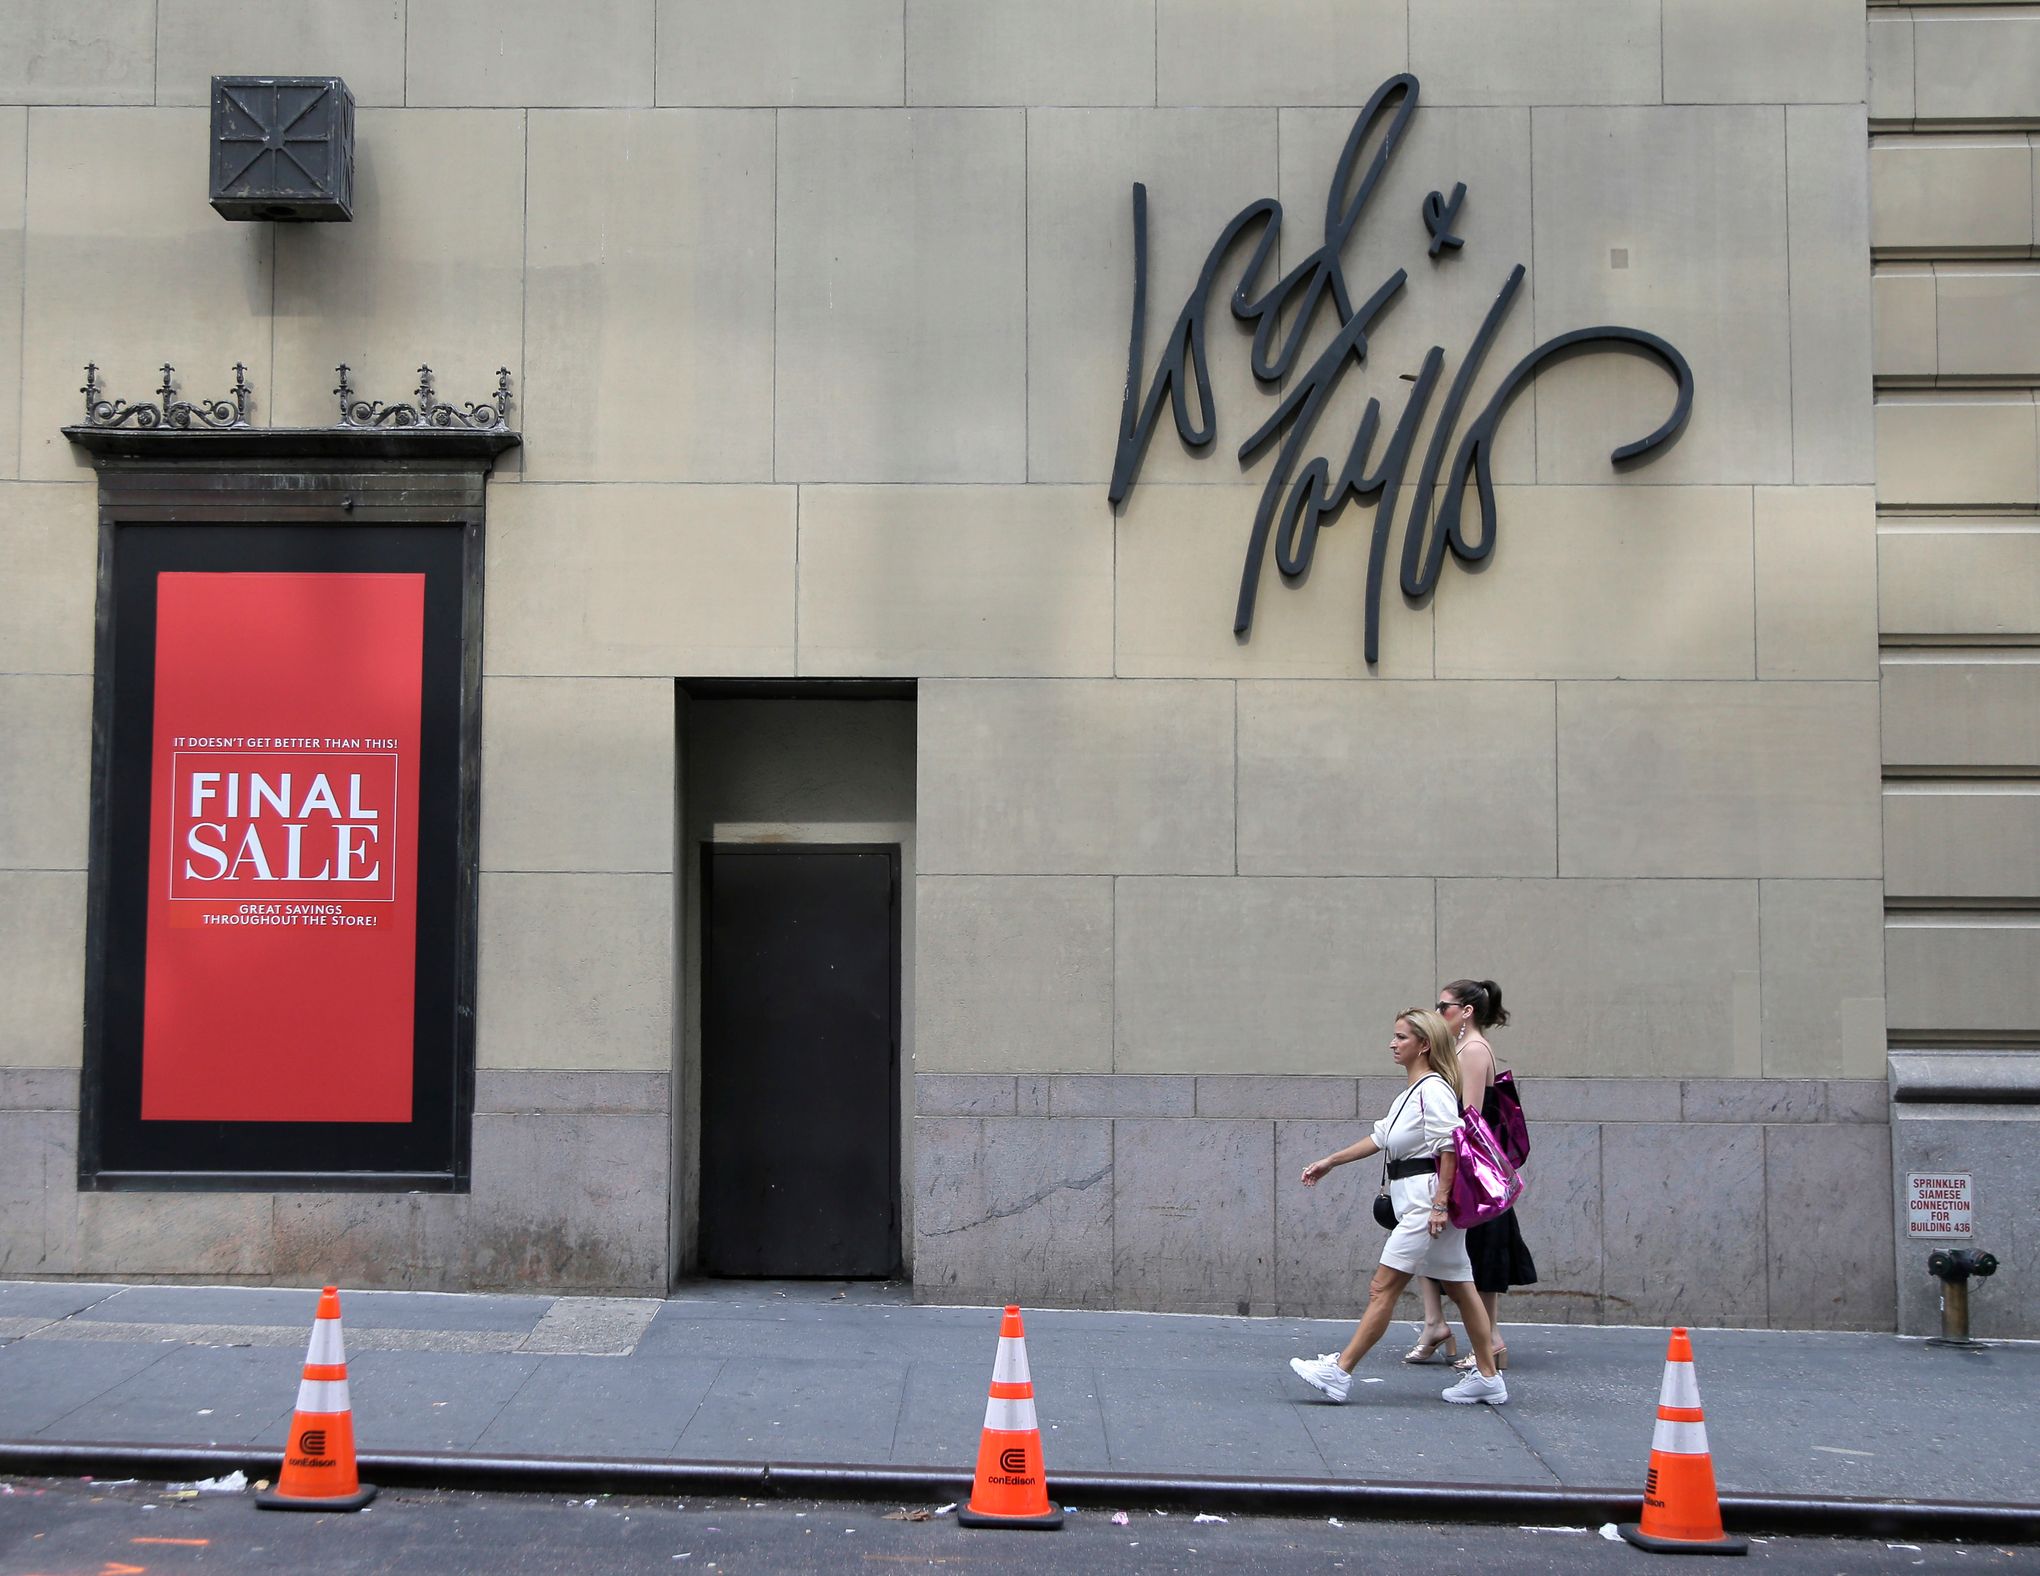 Rental clothing firm buys Lord & Taylor for $100M